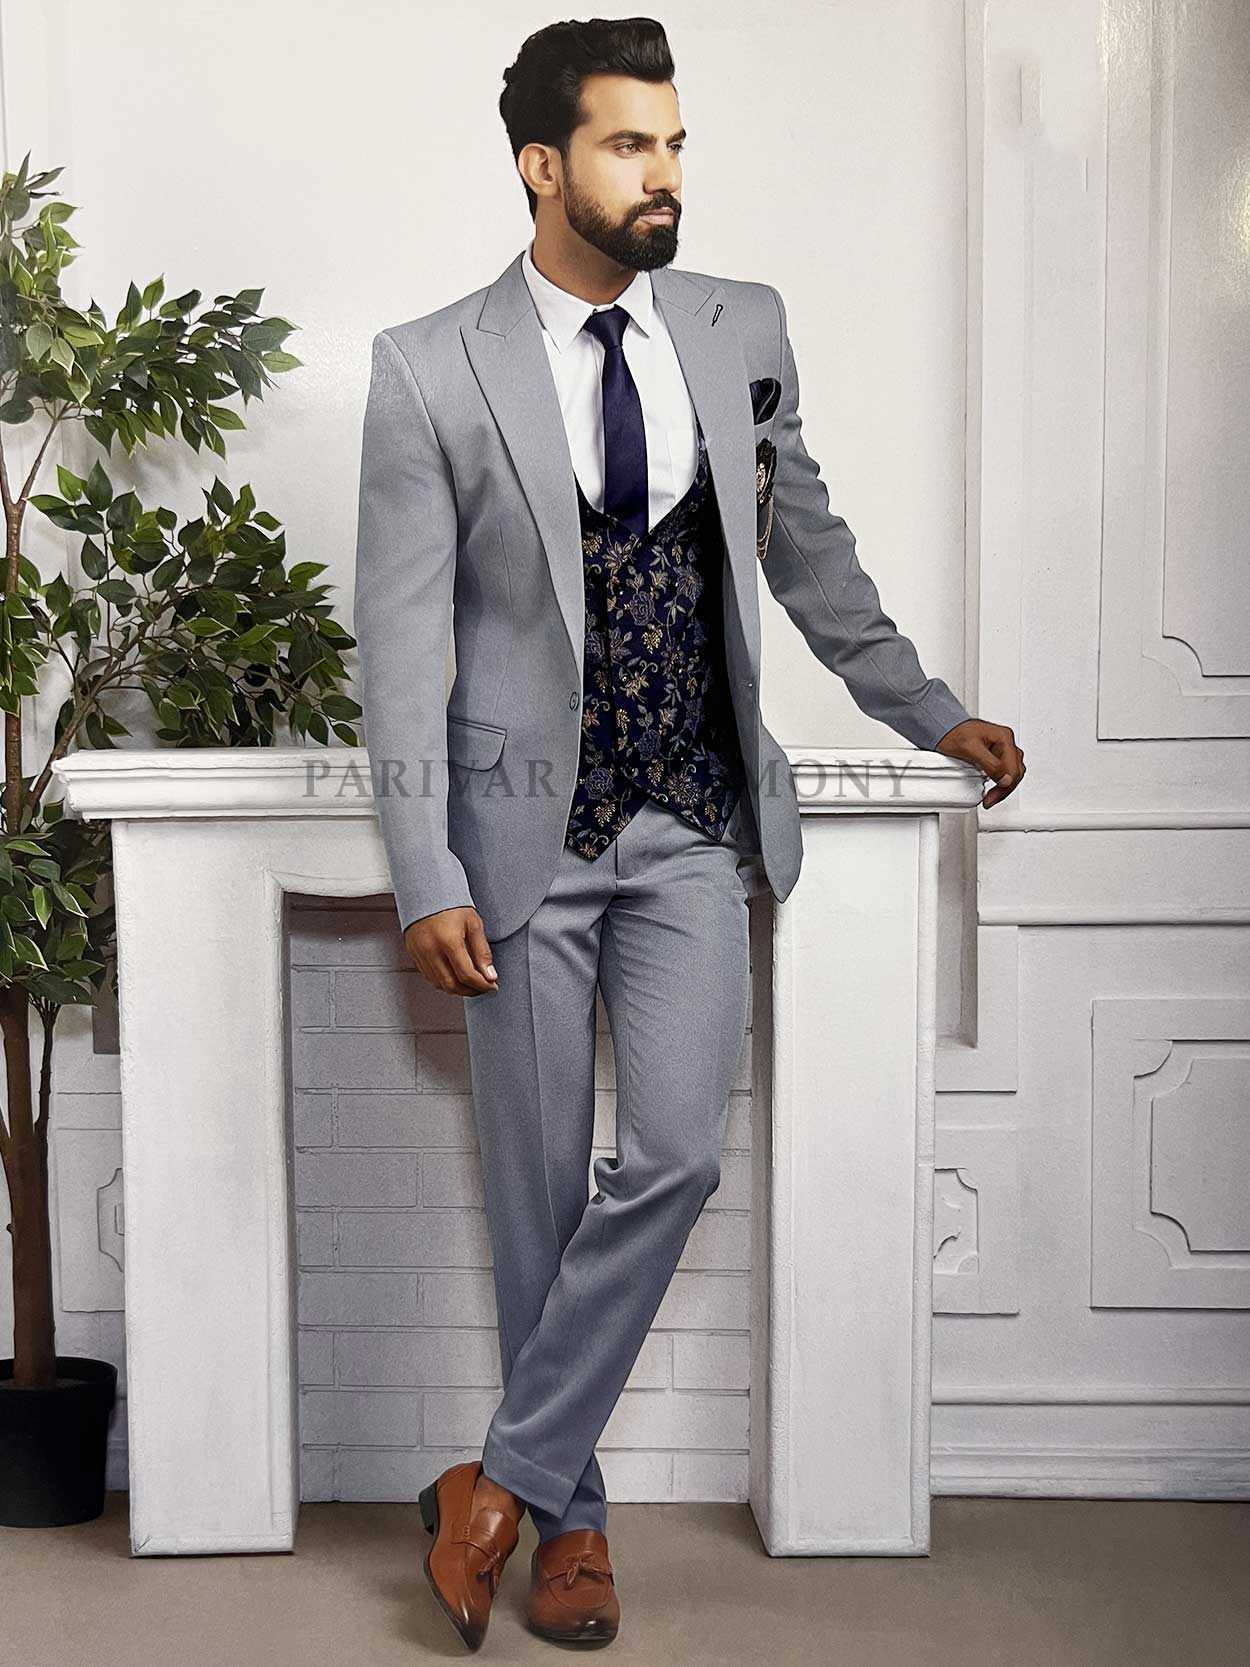 Best Suit Ideas For You to Suit-Up In March | Brown suits for men, Classy  suits, Cool suits